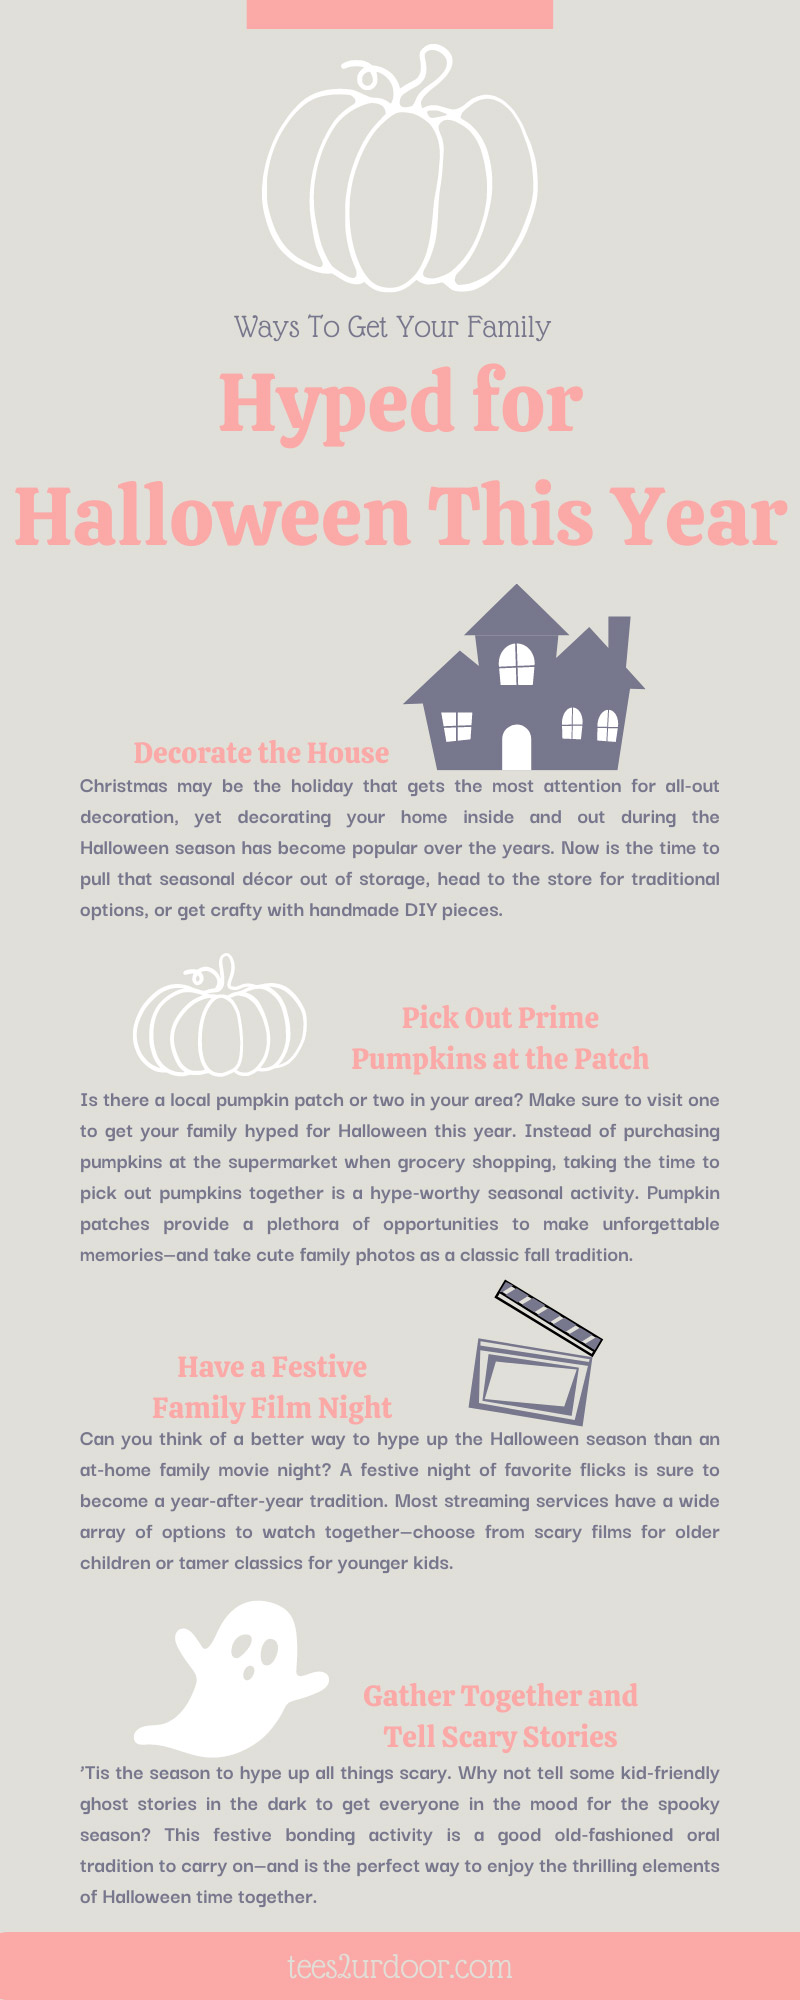 6 Ways To Get Your Family Hyped for Halloween This Year